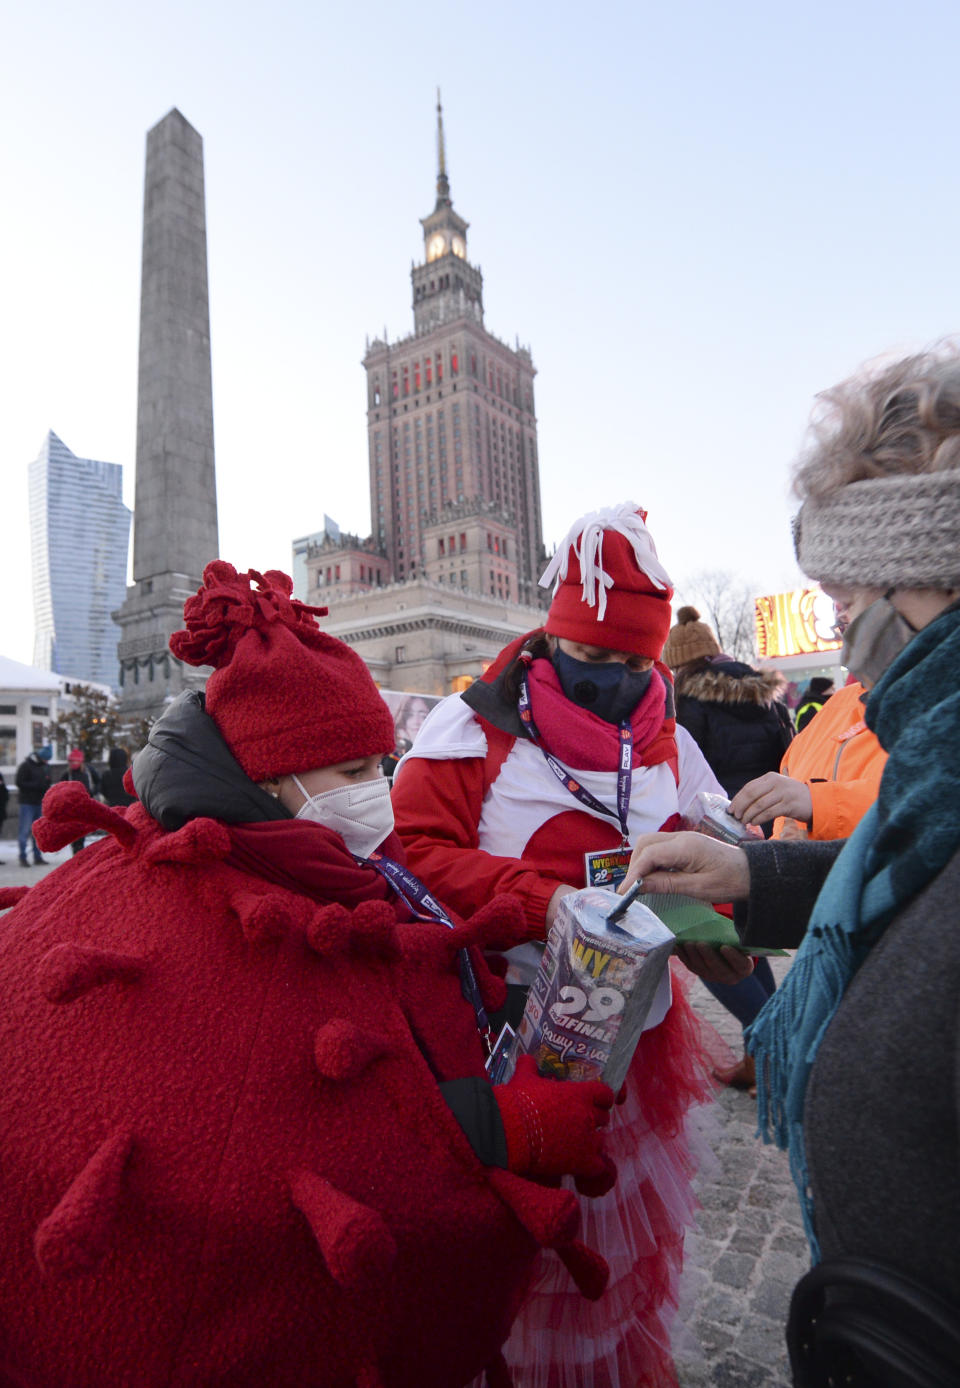 A child in a red costume collects money for Poland's most popular nationwide fundraiser for health purposes, the Great Orchestra of Christmas Charity, that was postponed by two weeks due to the pandemic, in downtown Warsaw, Poland, on Sunday, Jan. 31, 2021. Anti-government protesters angry about a near-total abortion ban suspended their marches for the weekend to show solidarity and ensure that they didn't steal the spotlight from the event. (AP Photo/Czarek Sokolowski)